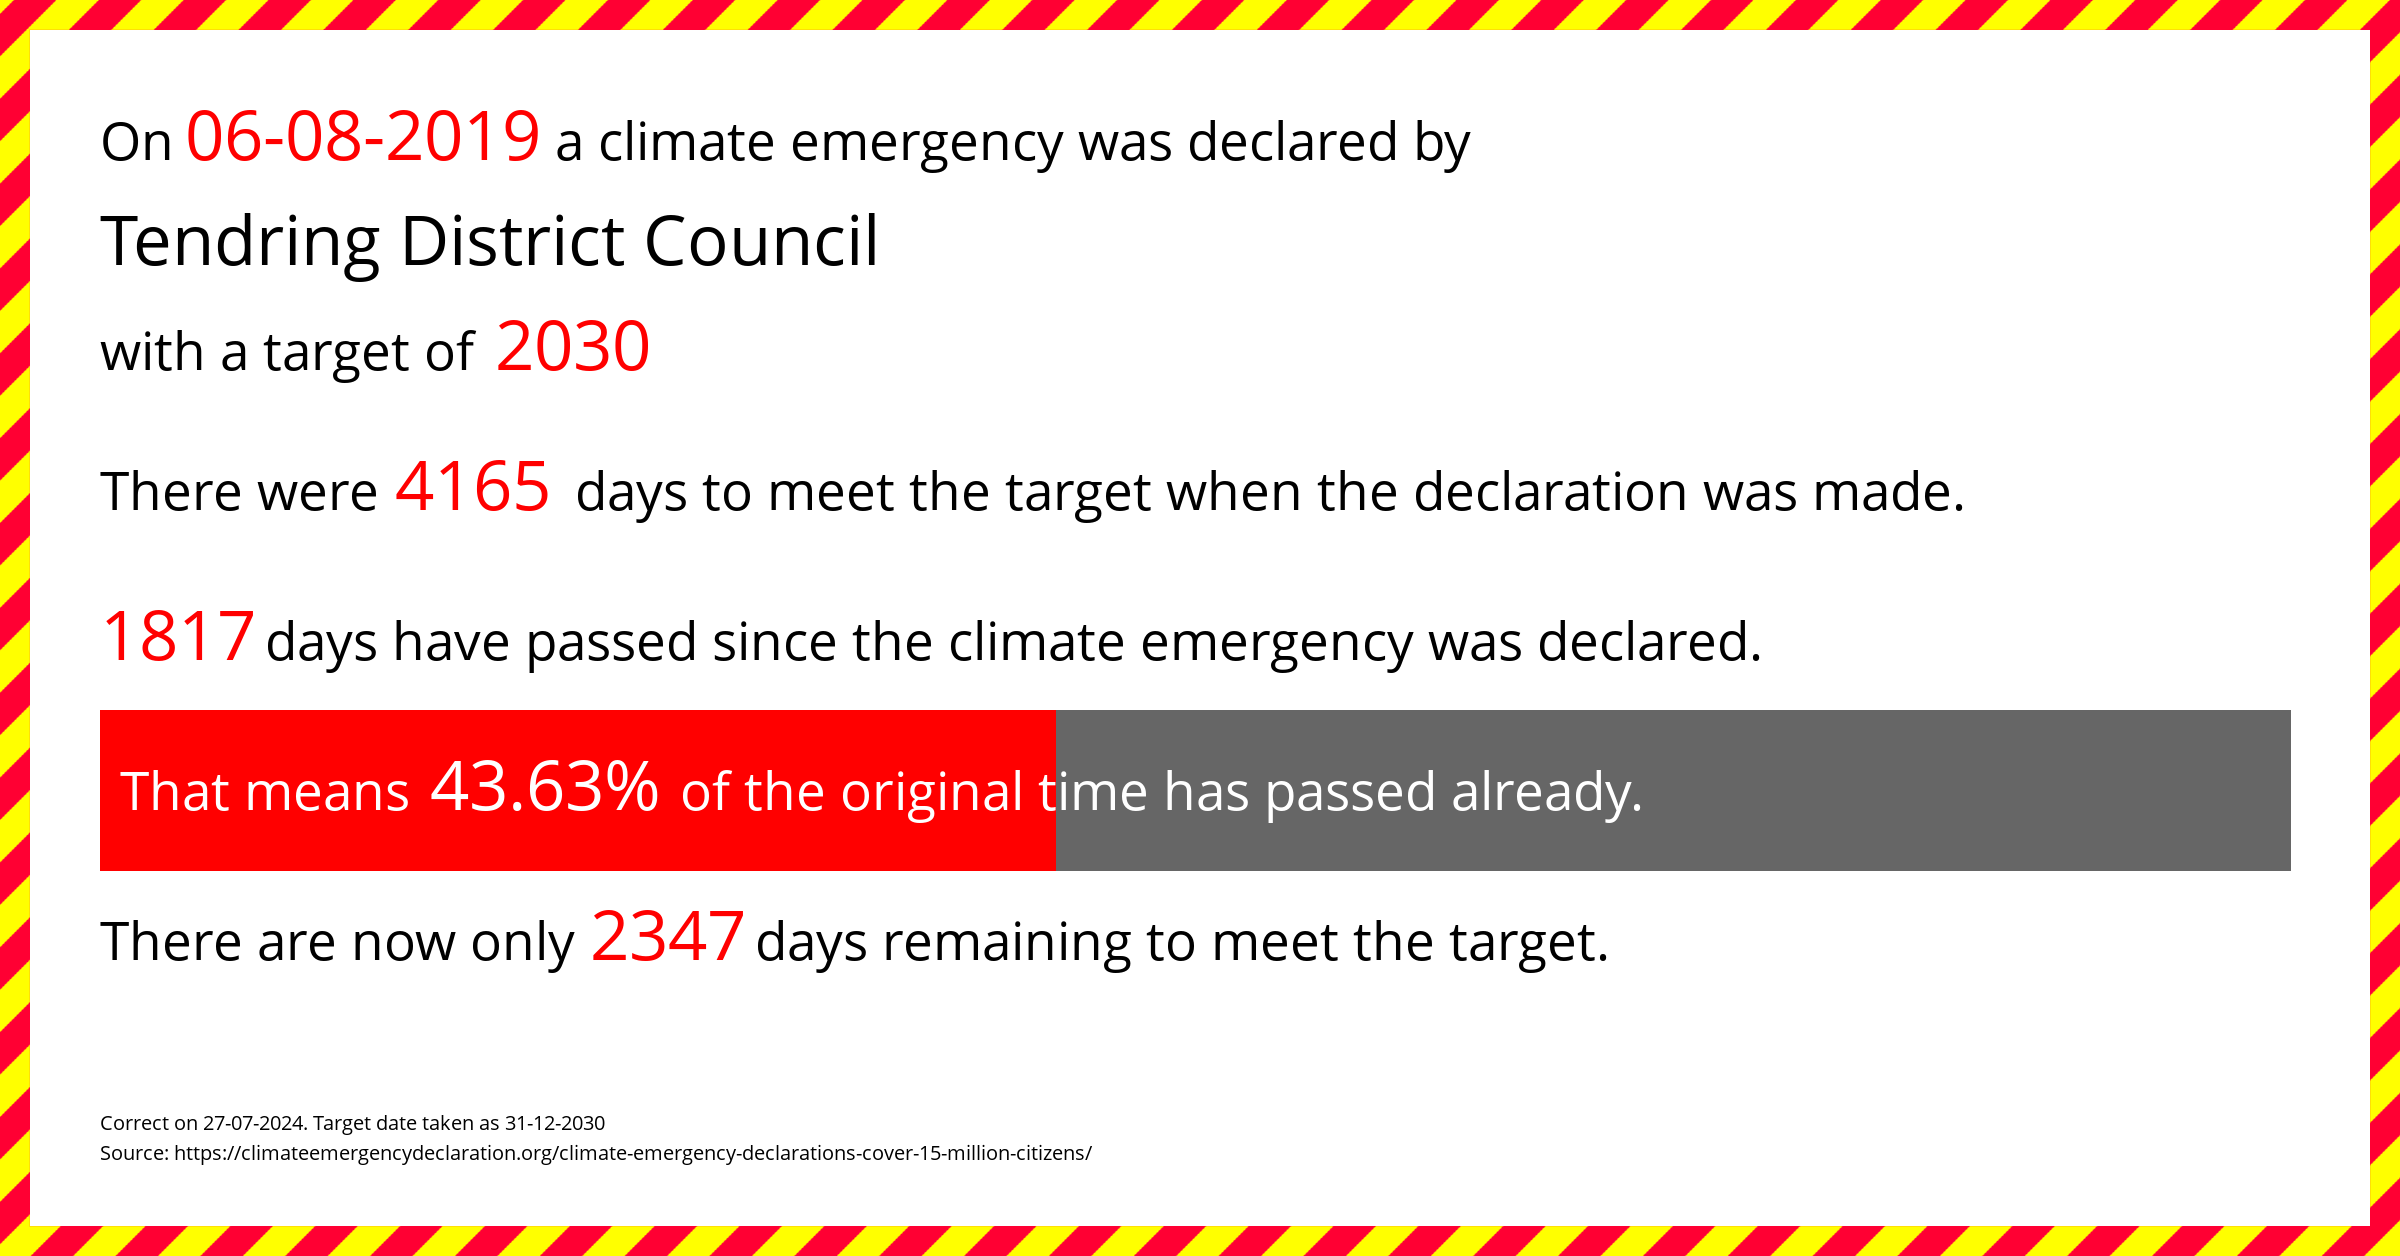 Tendring District Council declared a Climate emergency on Tuesday 6th August 2019, with a target of 2030.